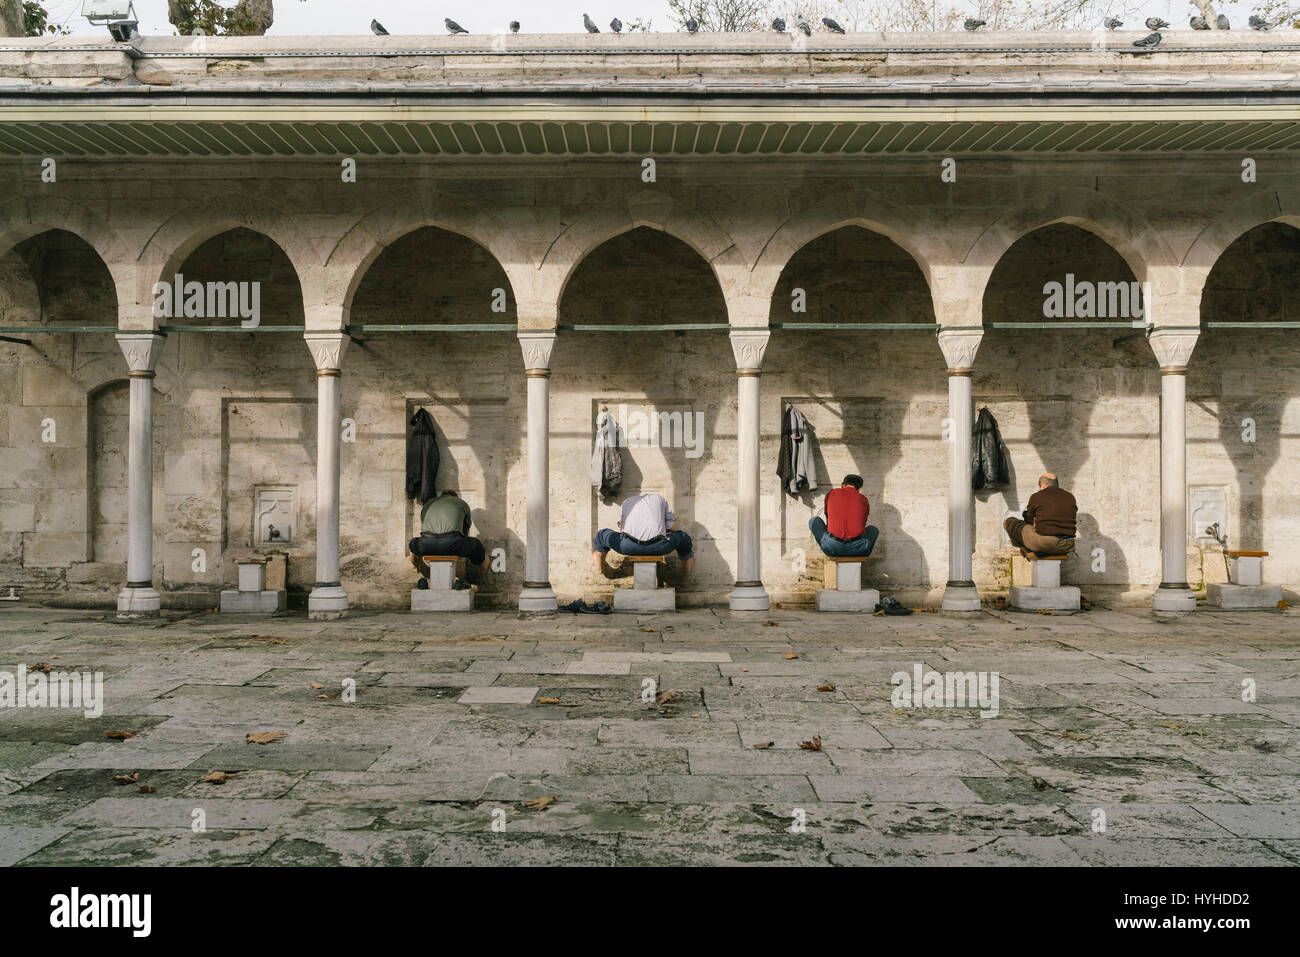 Men wash before prayer at the Mosque in Istanbul, Turkey Stock Photo